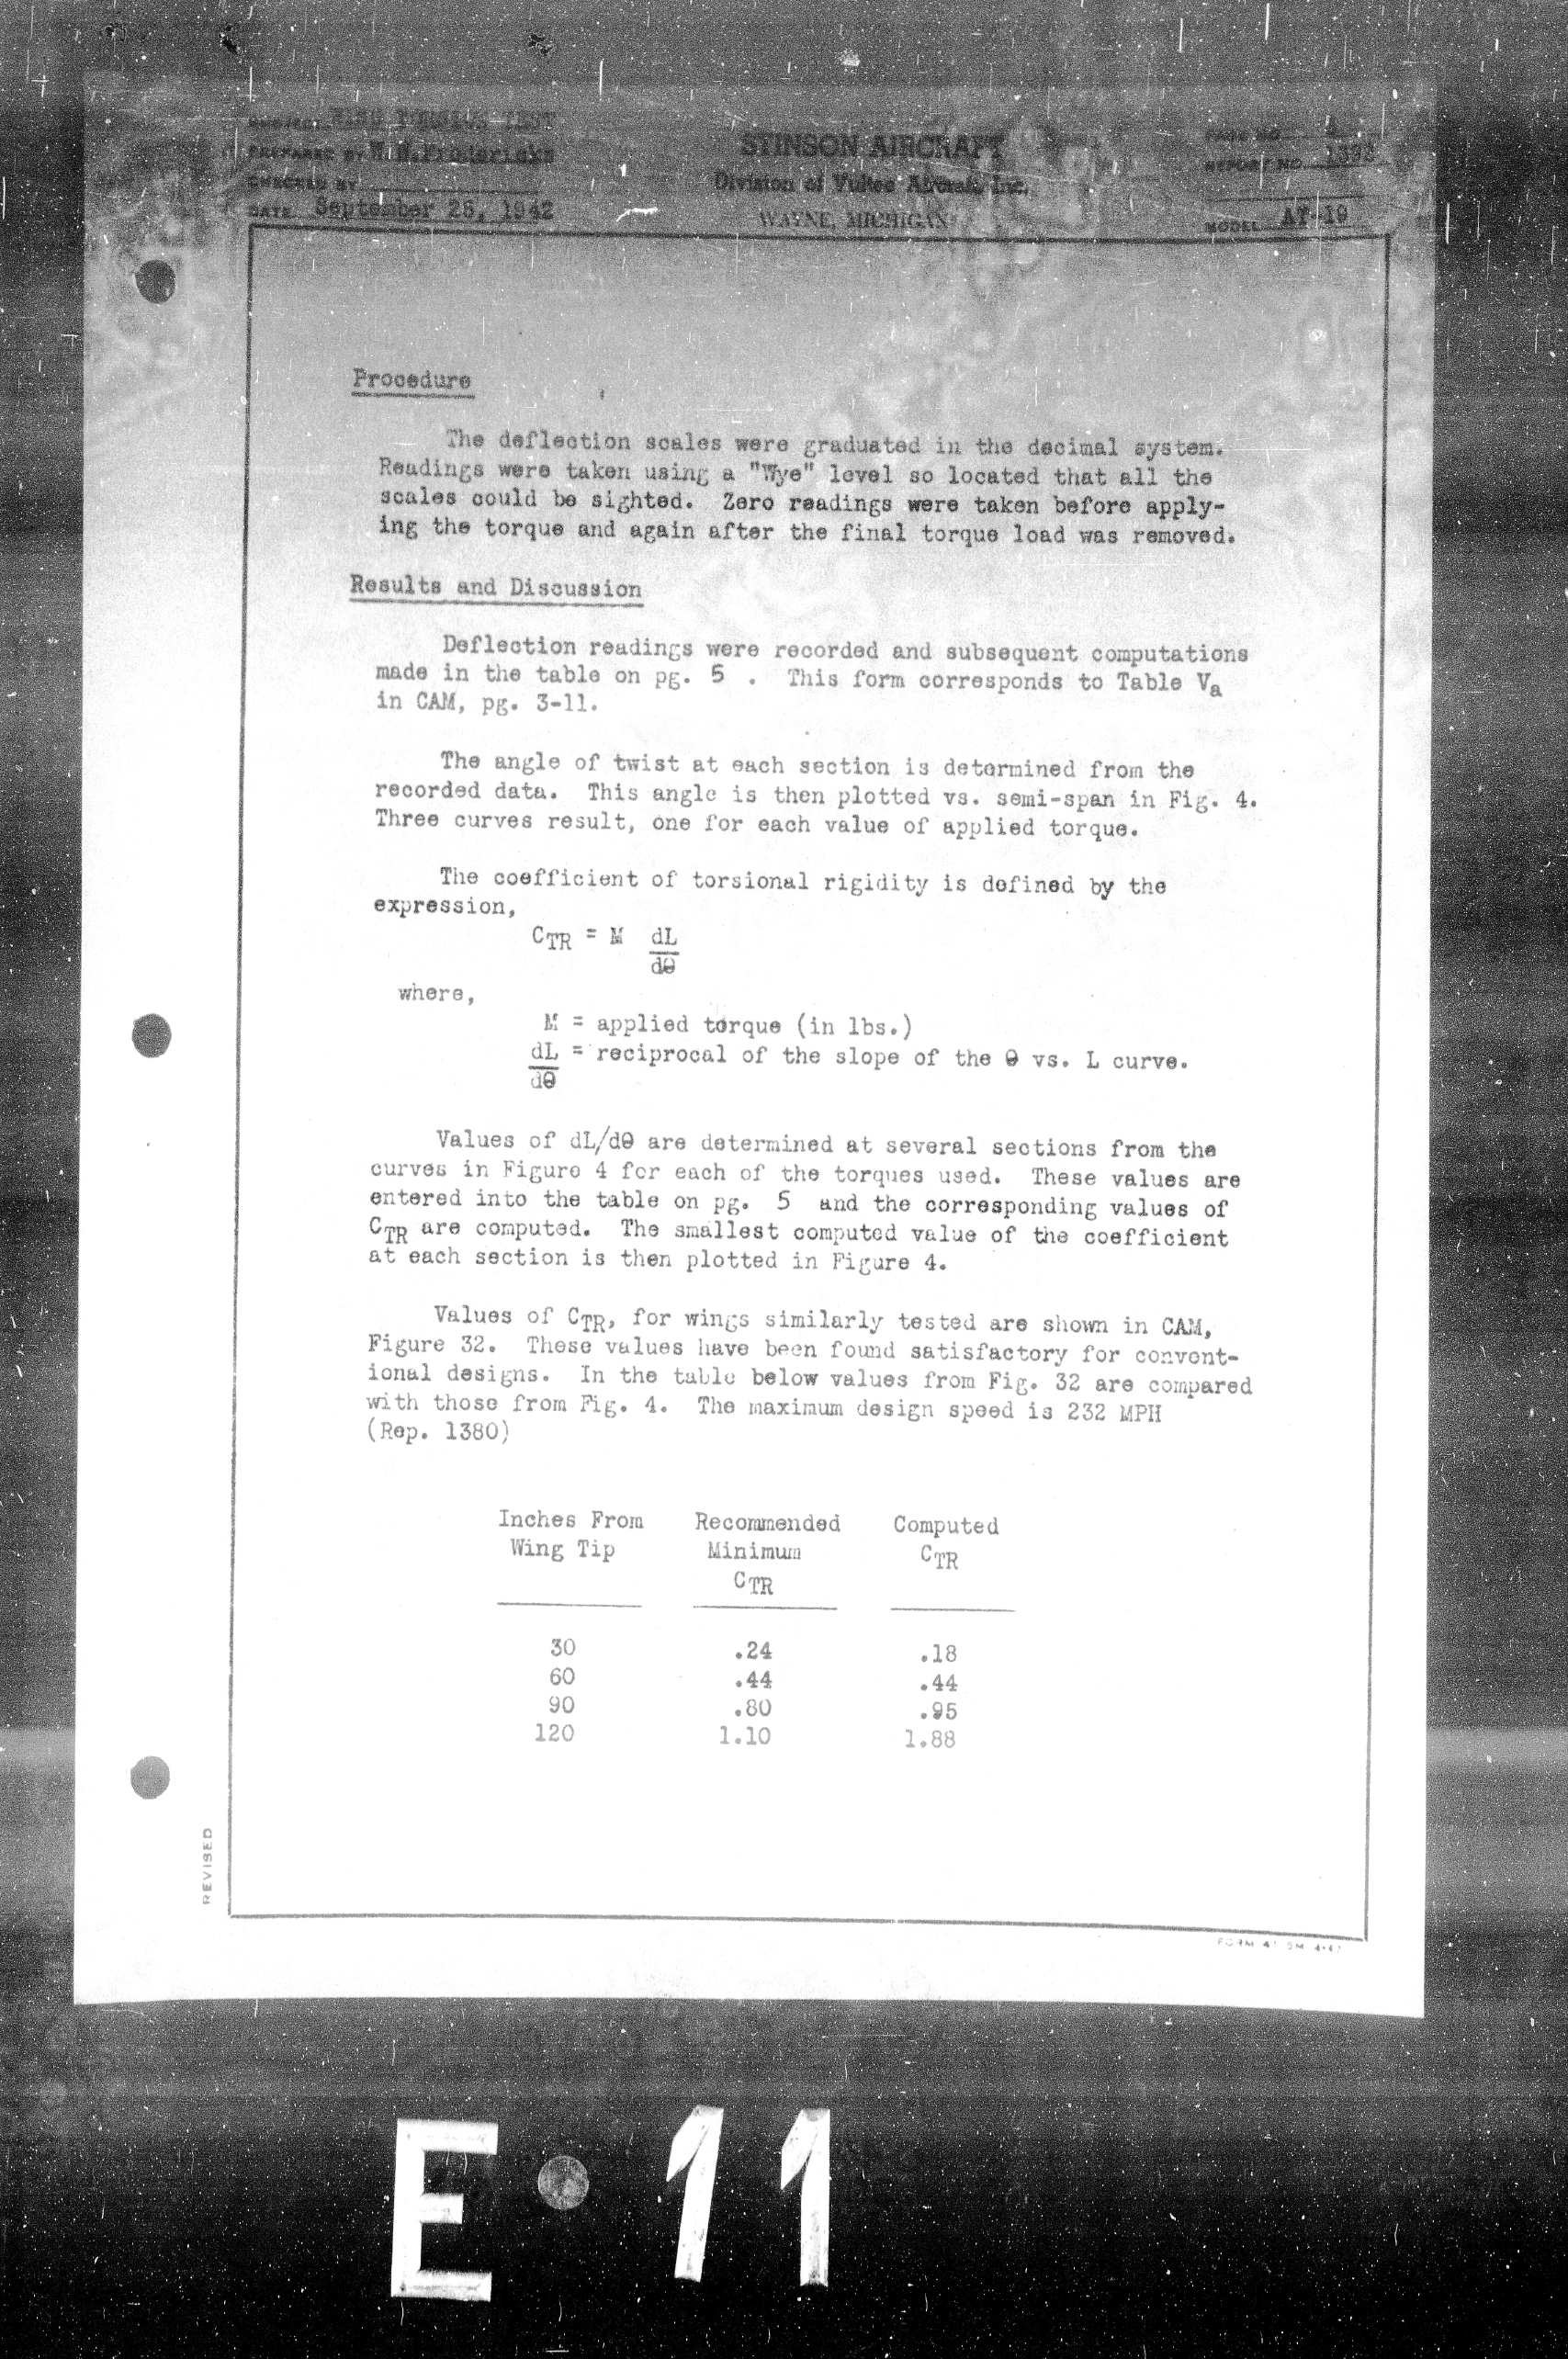 Sample page 5 from AirCorps Library document: Wing Torsion Tests for Model AT-19